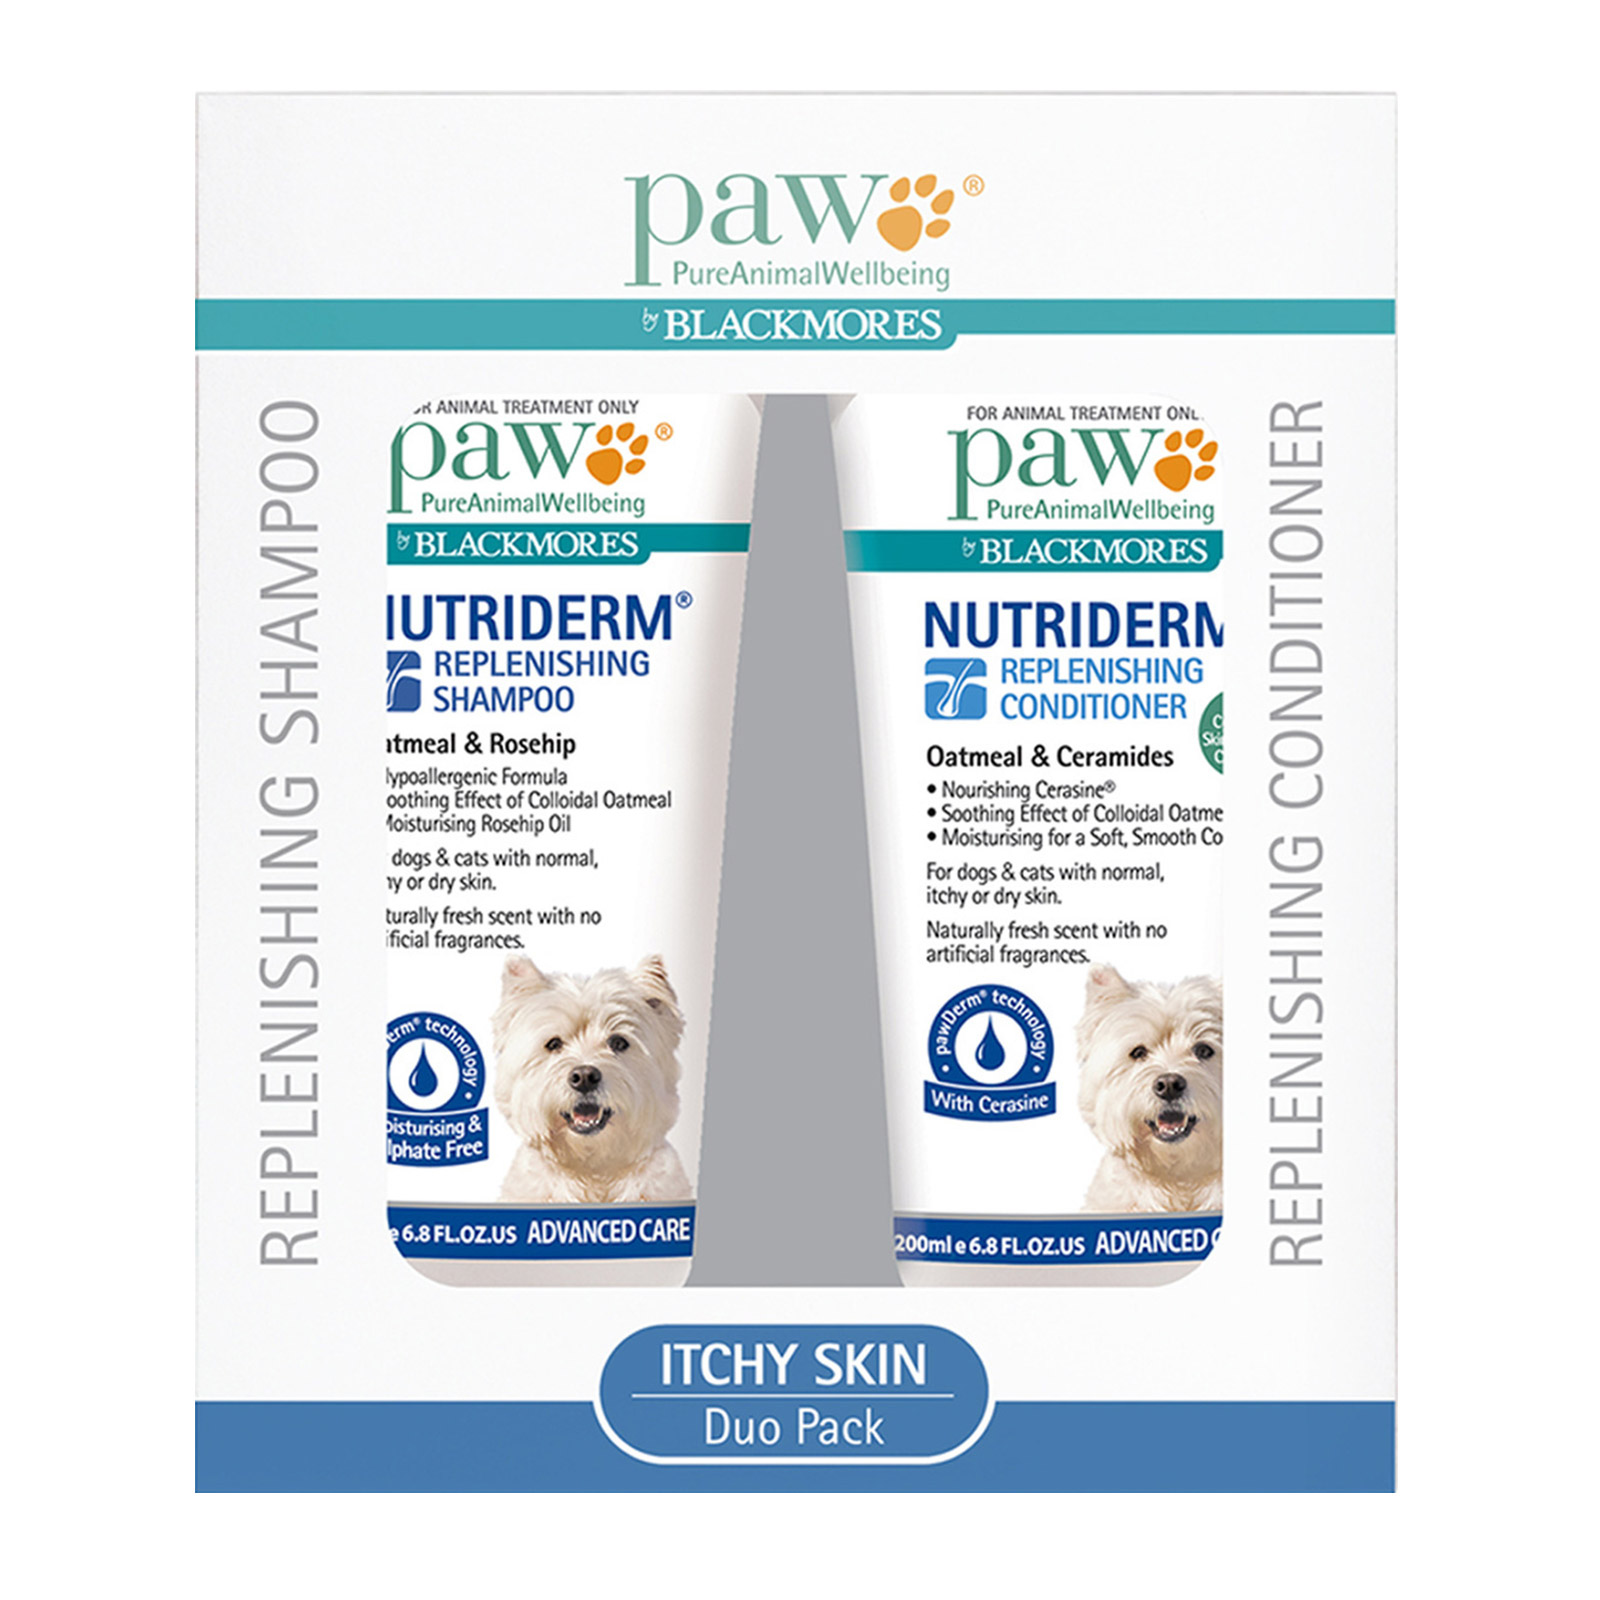 PAW Nutriderm Itchy Skin Duo Pack for Dogs